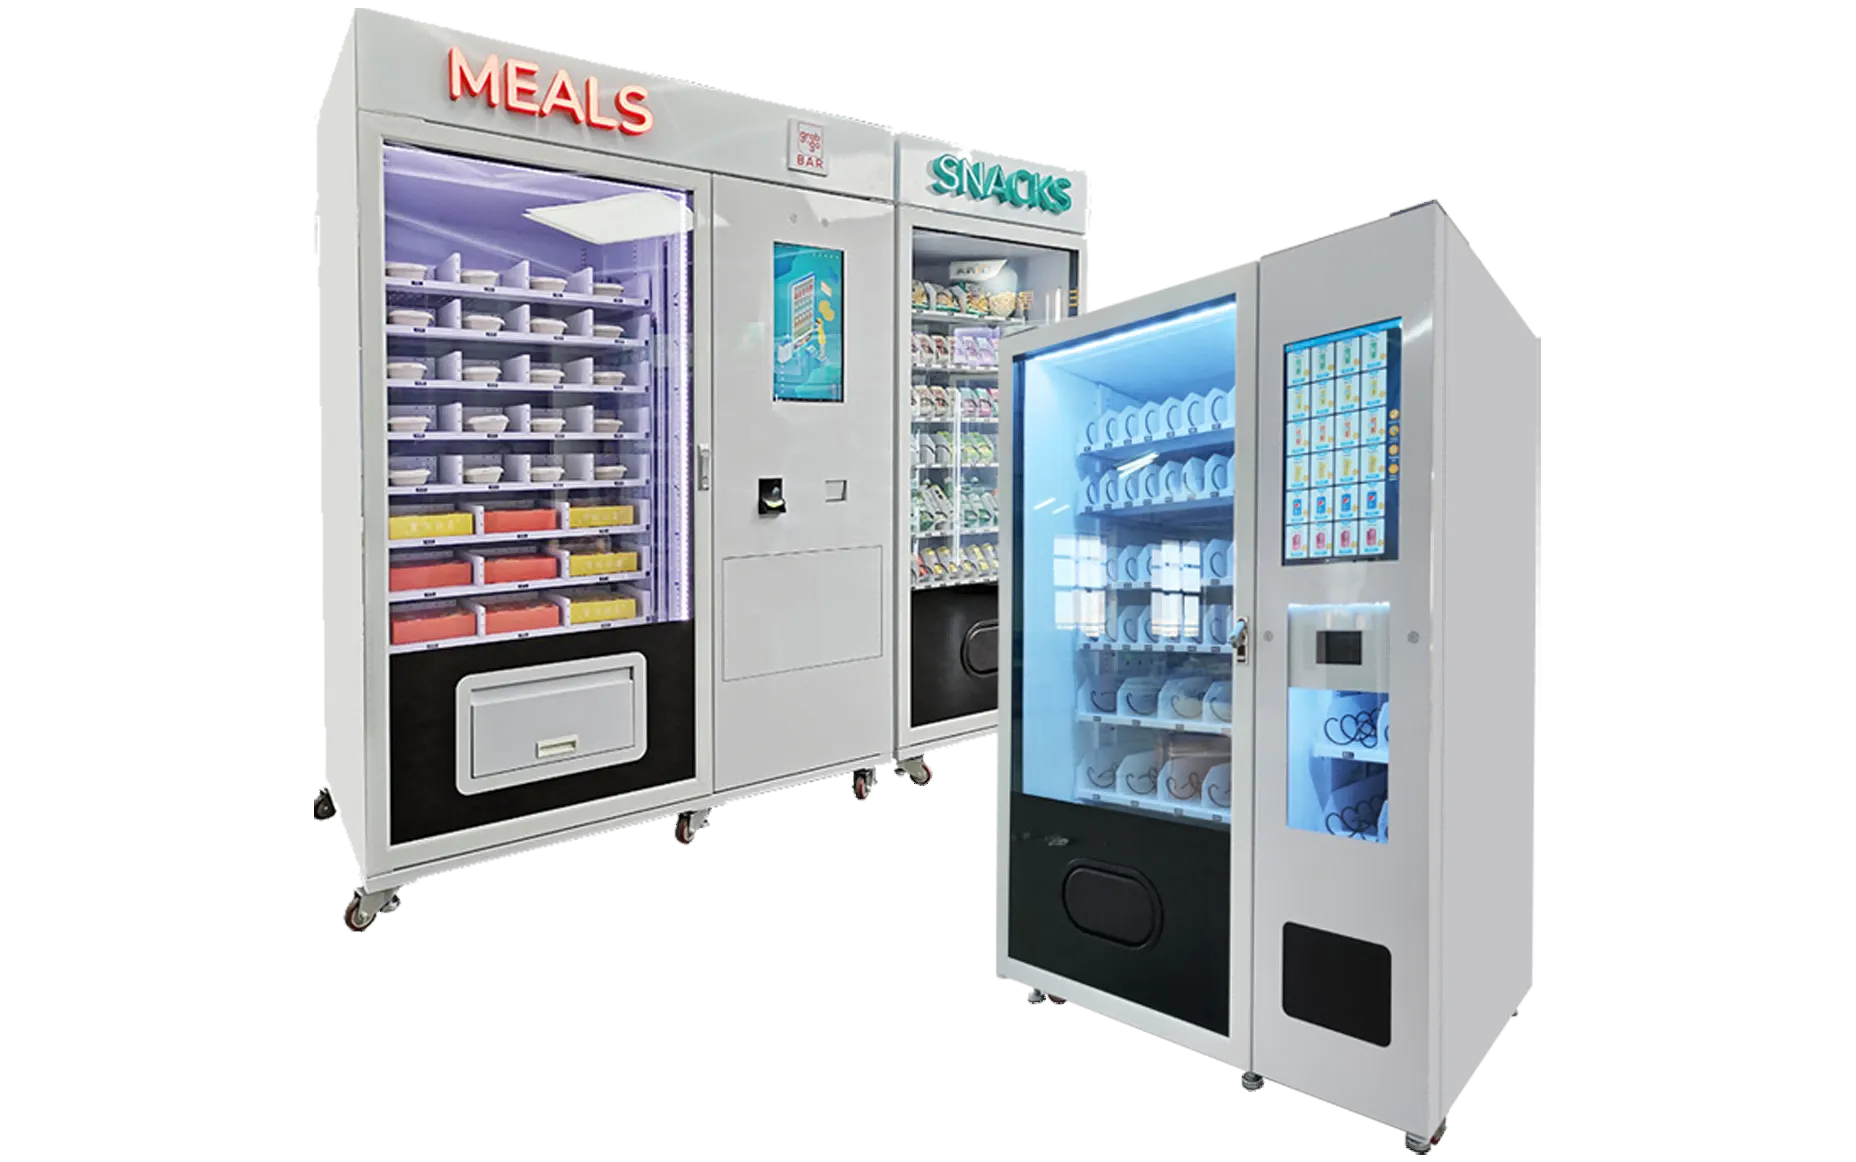 weimi snack drink vending machine 300 big capacity suitable for selling meals pre made food,factory and office vending solution